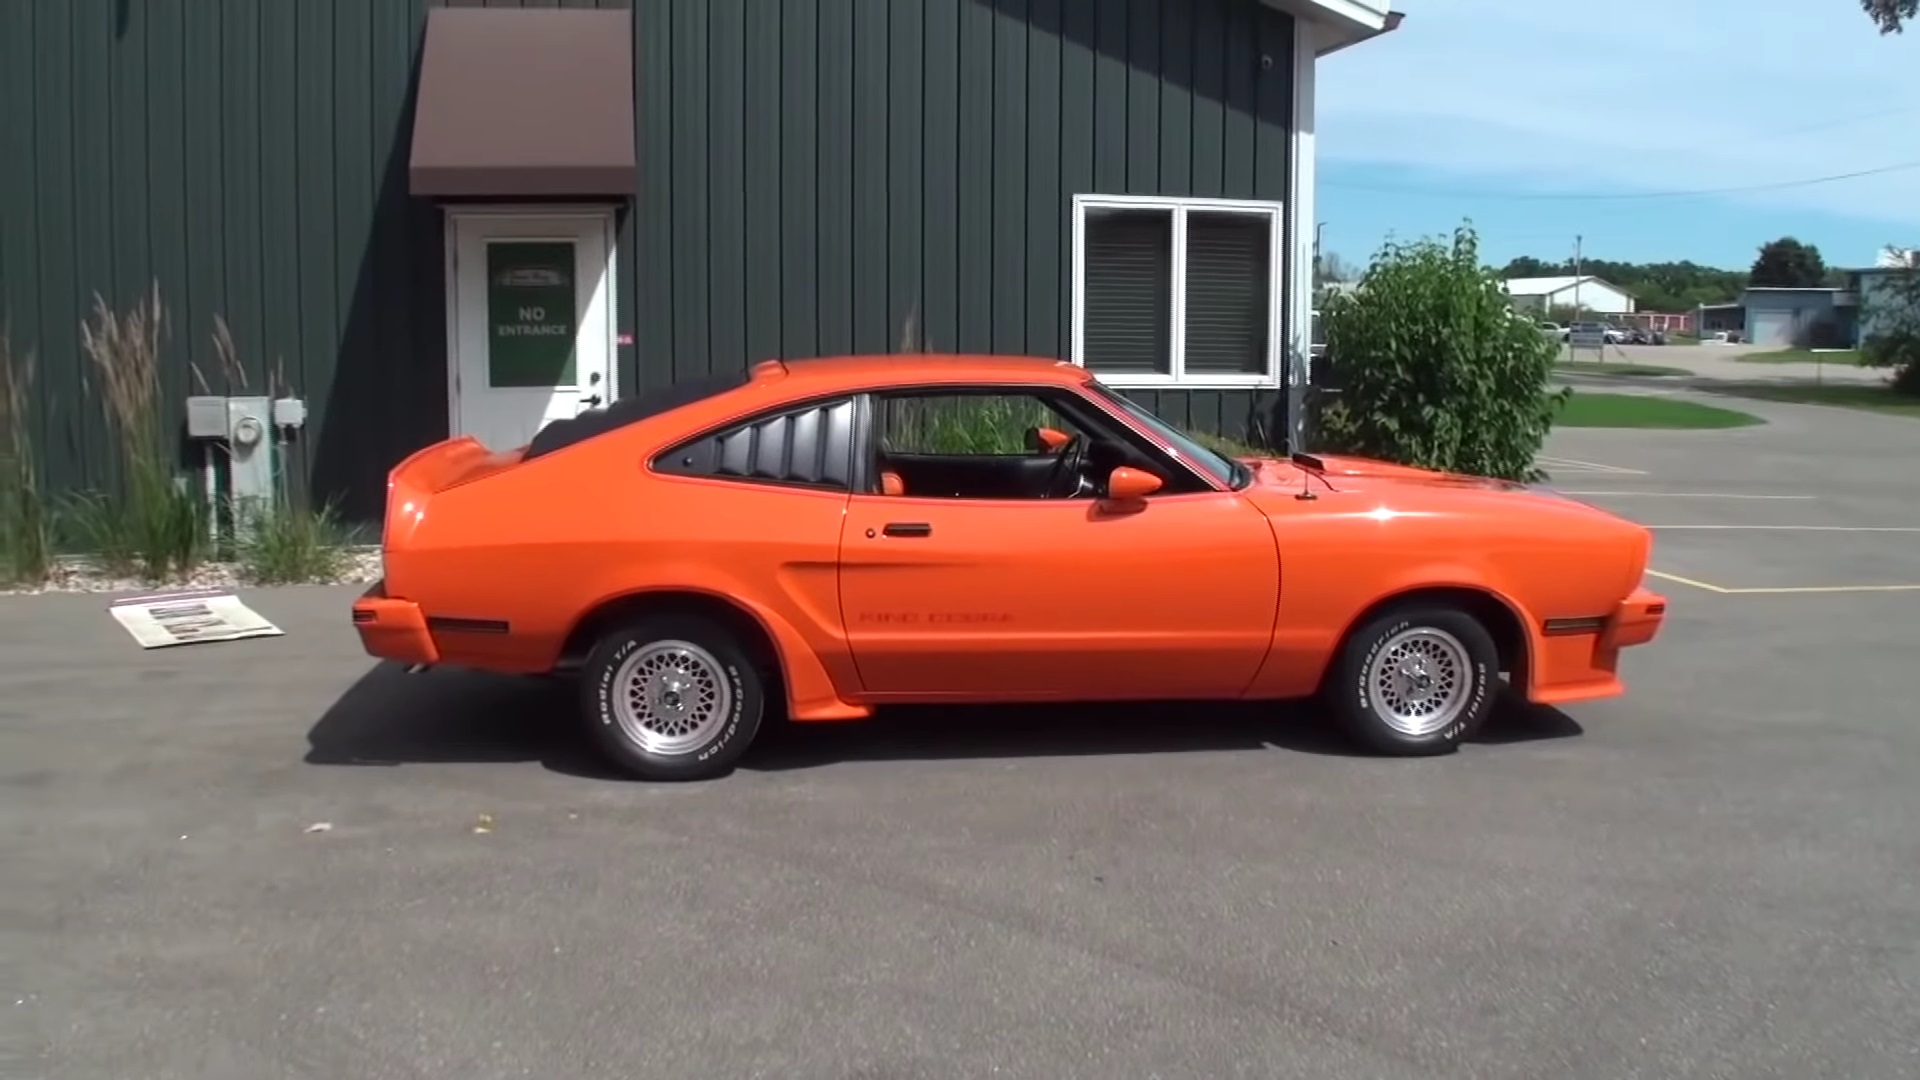 Video: Newly Restored 1978 Ford Mustang II King Cobra Overview